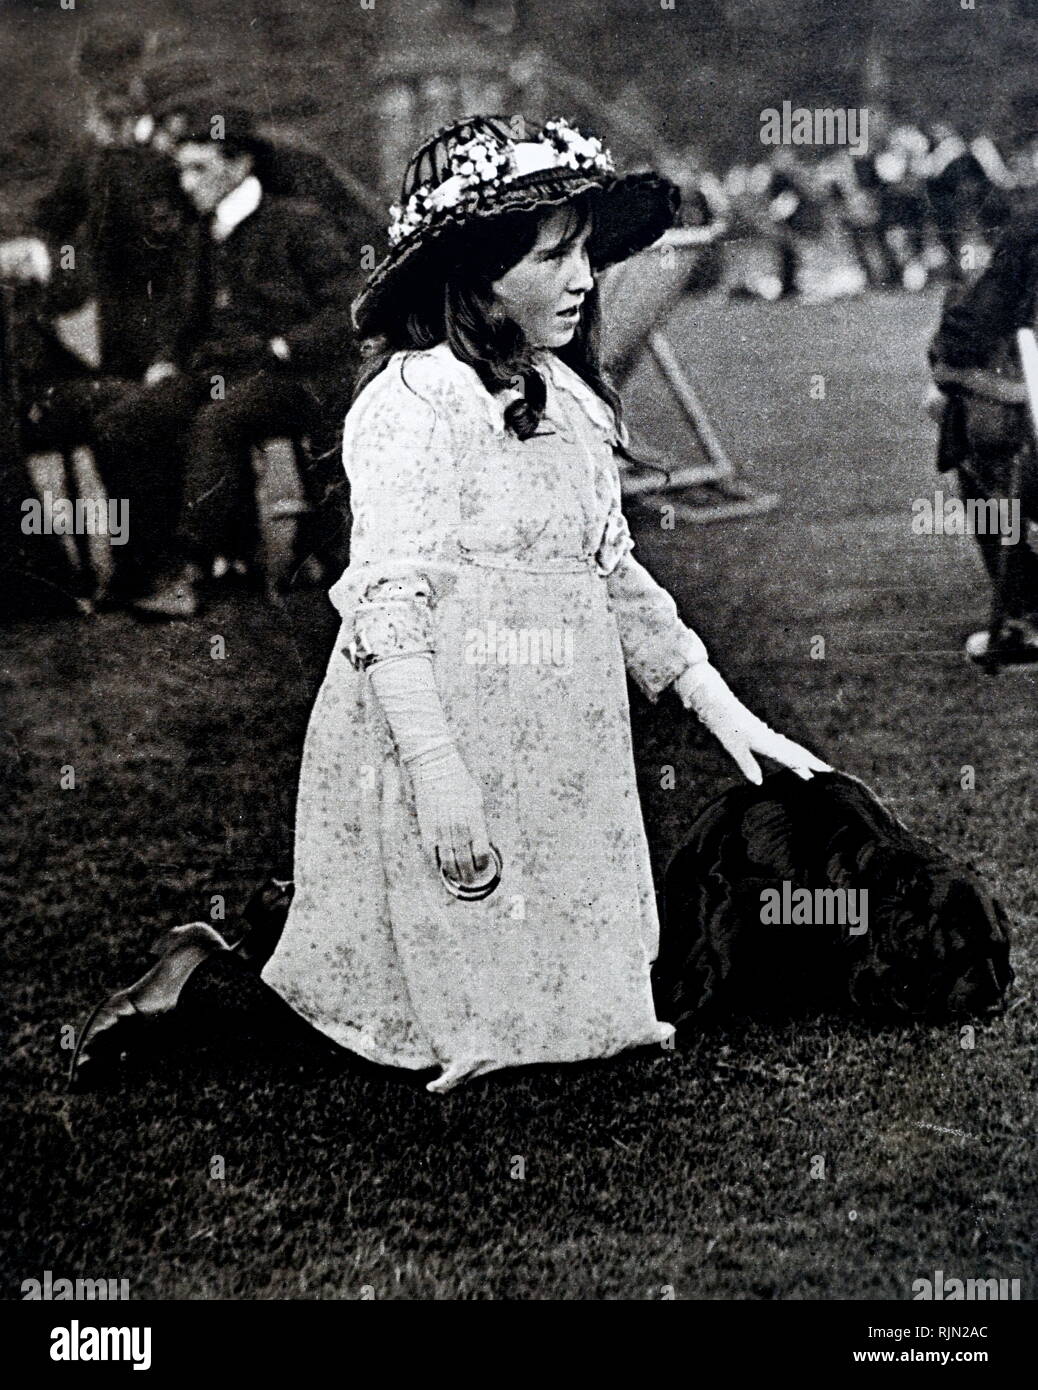 Lady Elizabeth Bowes Lyon (later Queen consort Elizabeth of Great Britain), dressed up for a garden party in the grounds of Glamis Castle. 1907 - 1908 Stock Photo